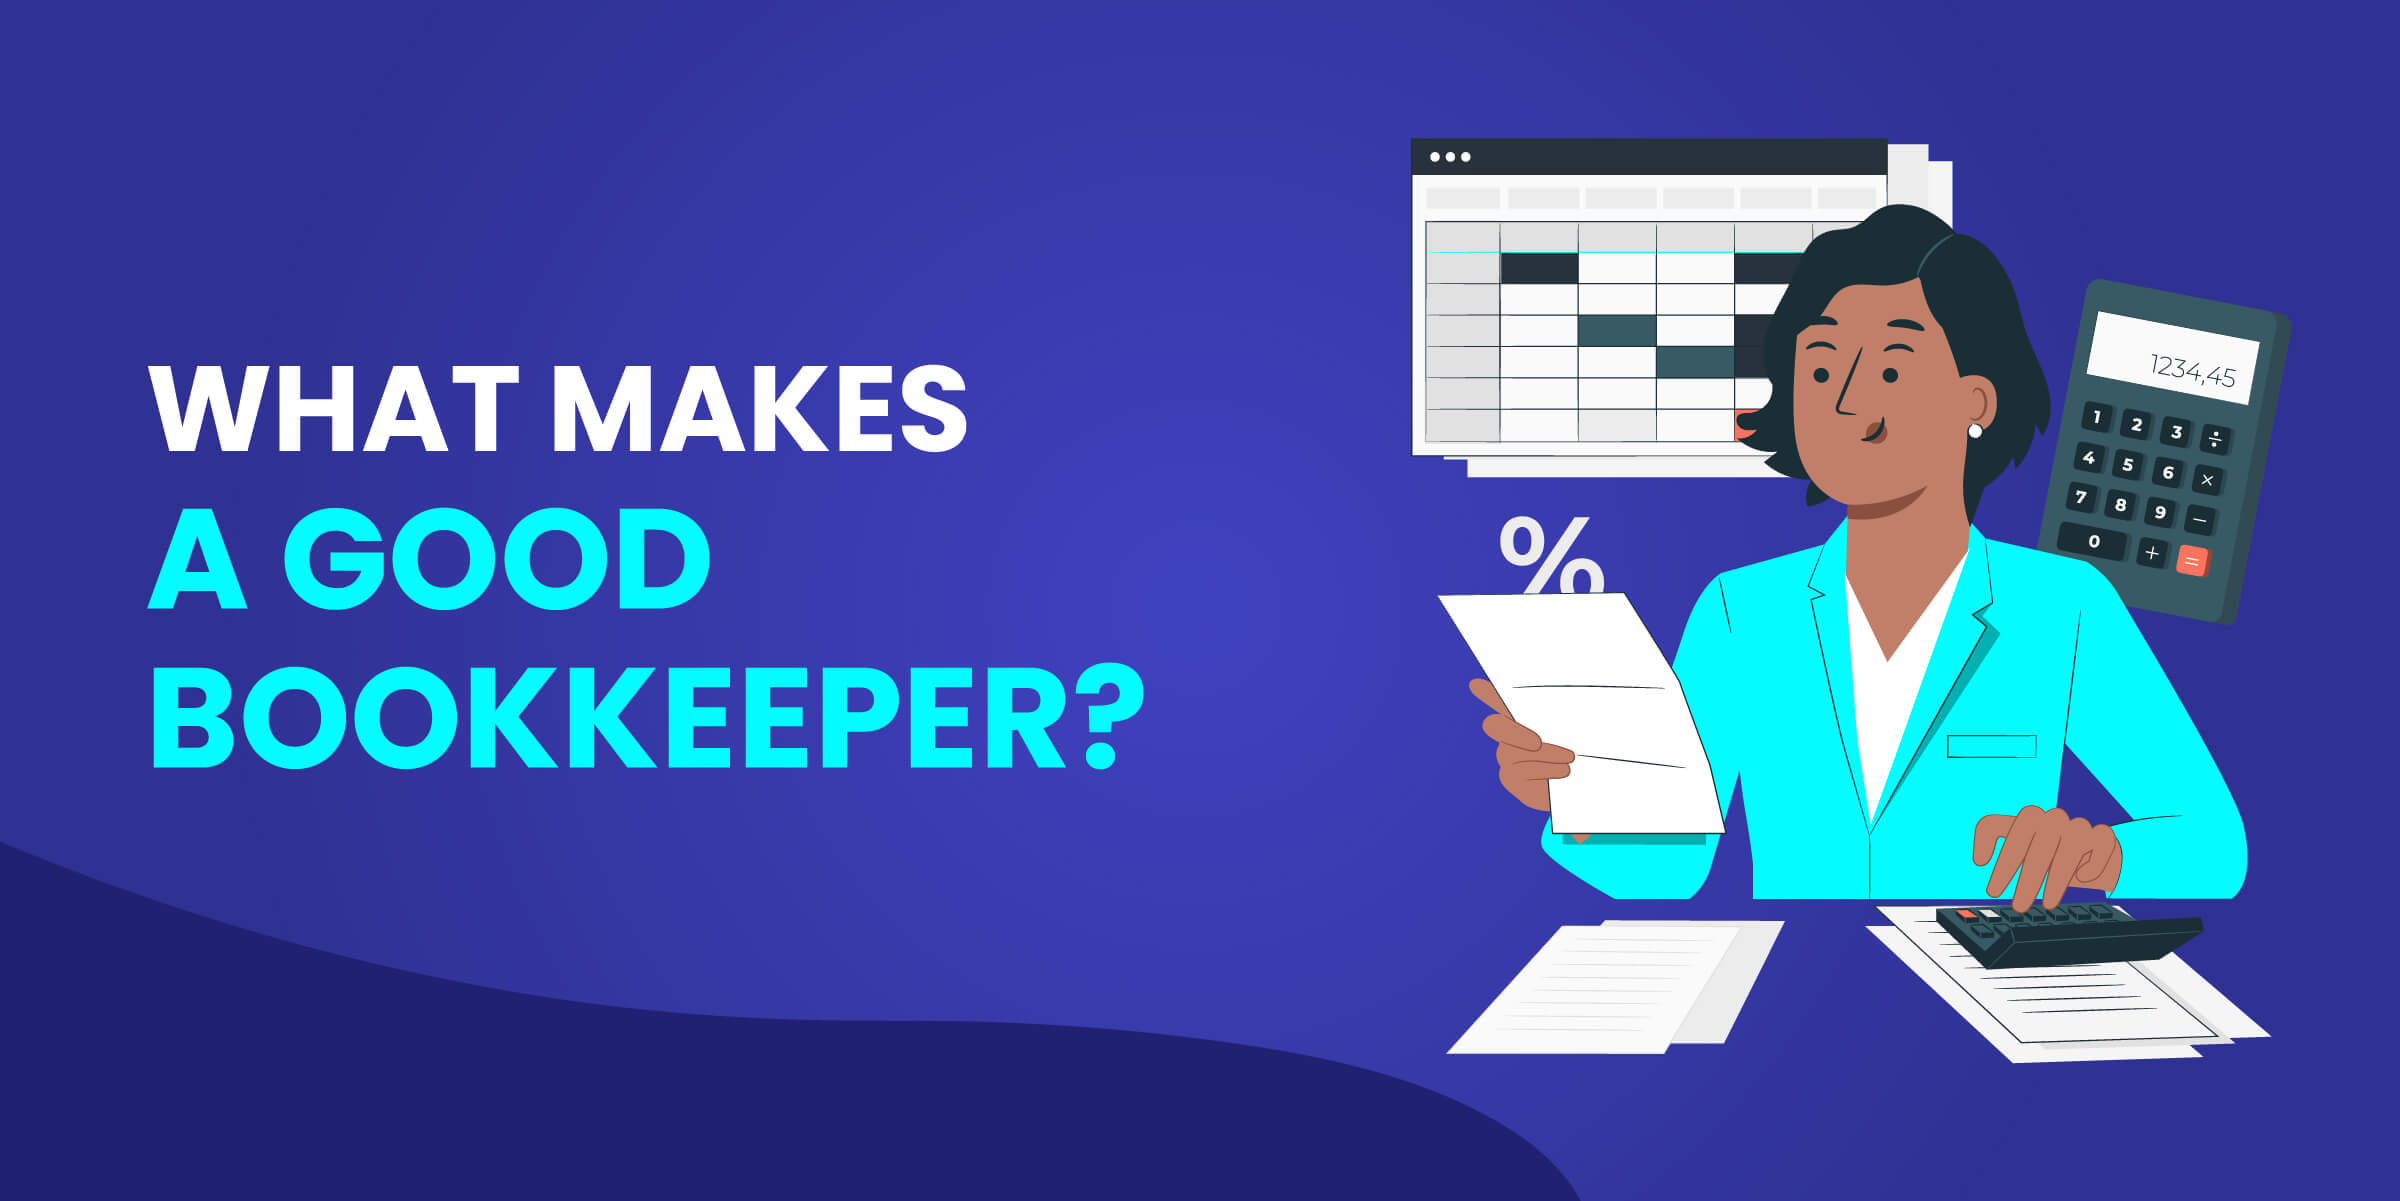 What Makes a Good Bookkeeper